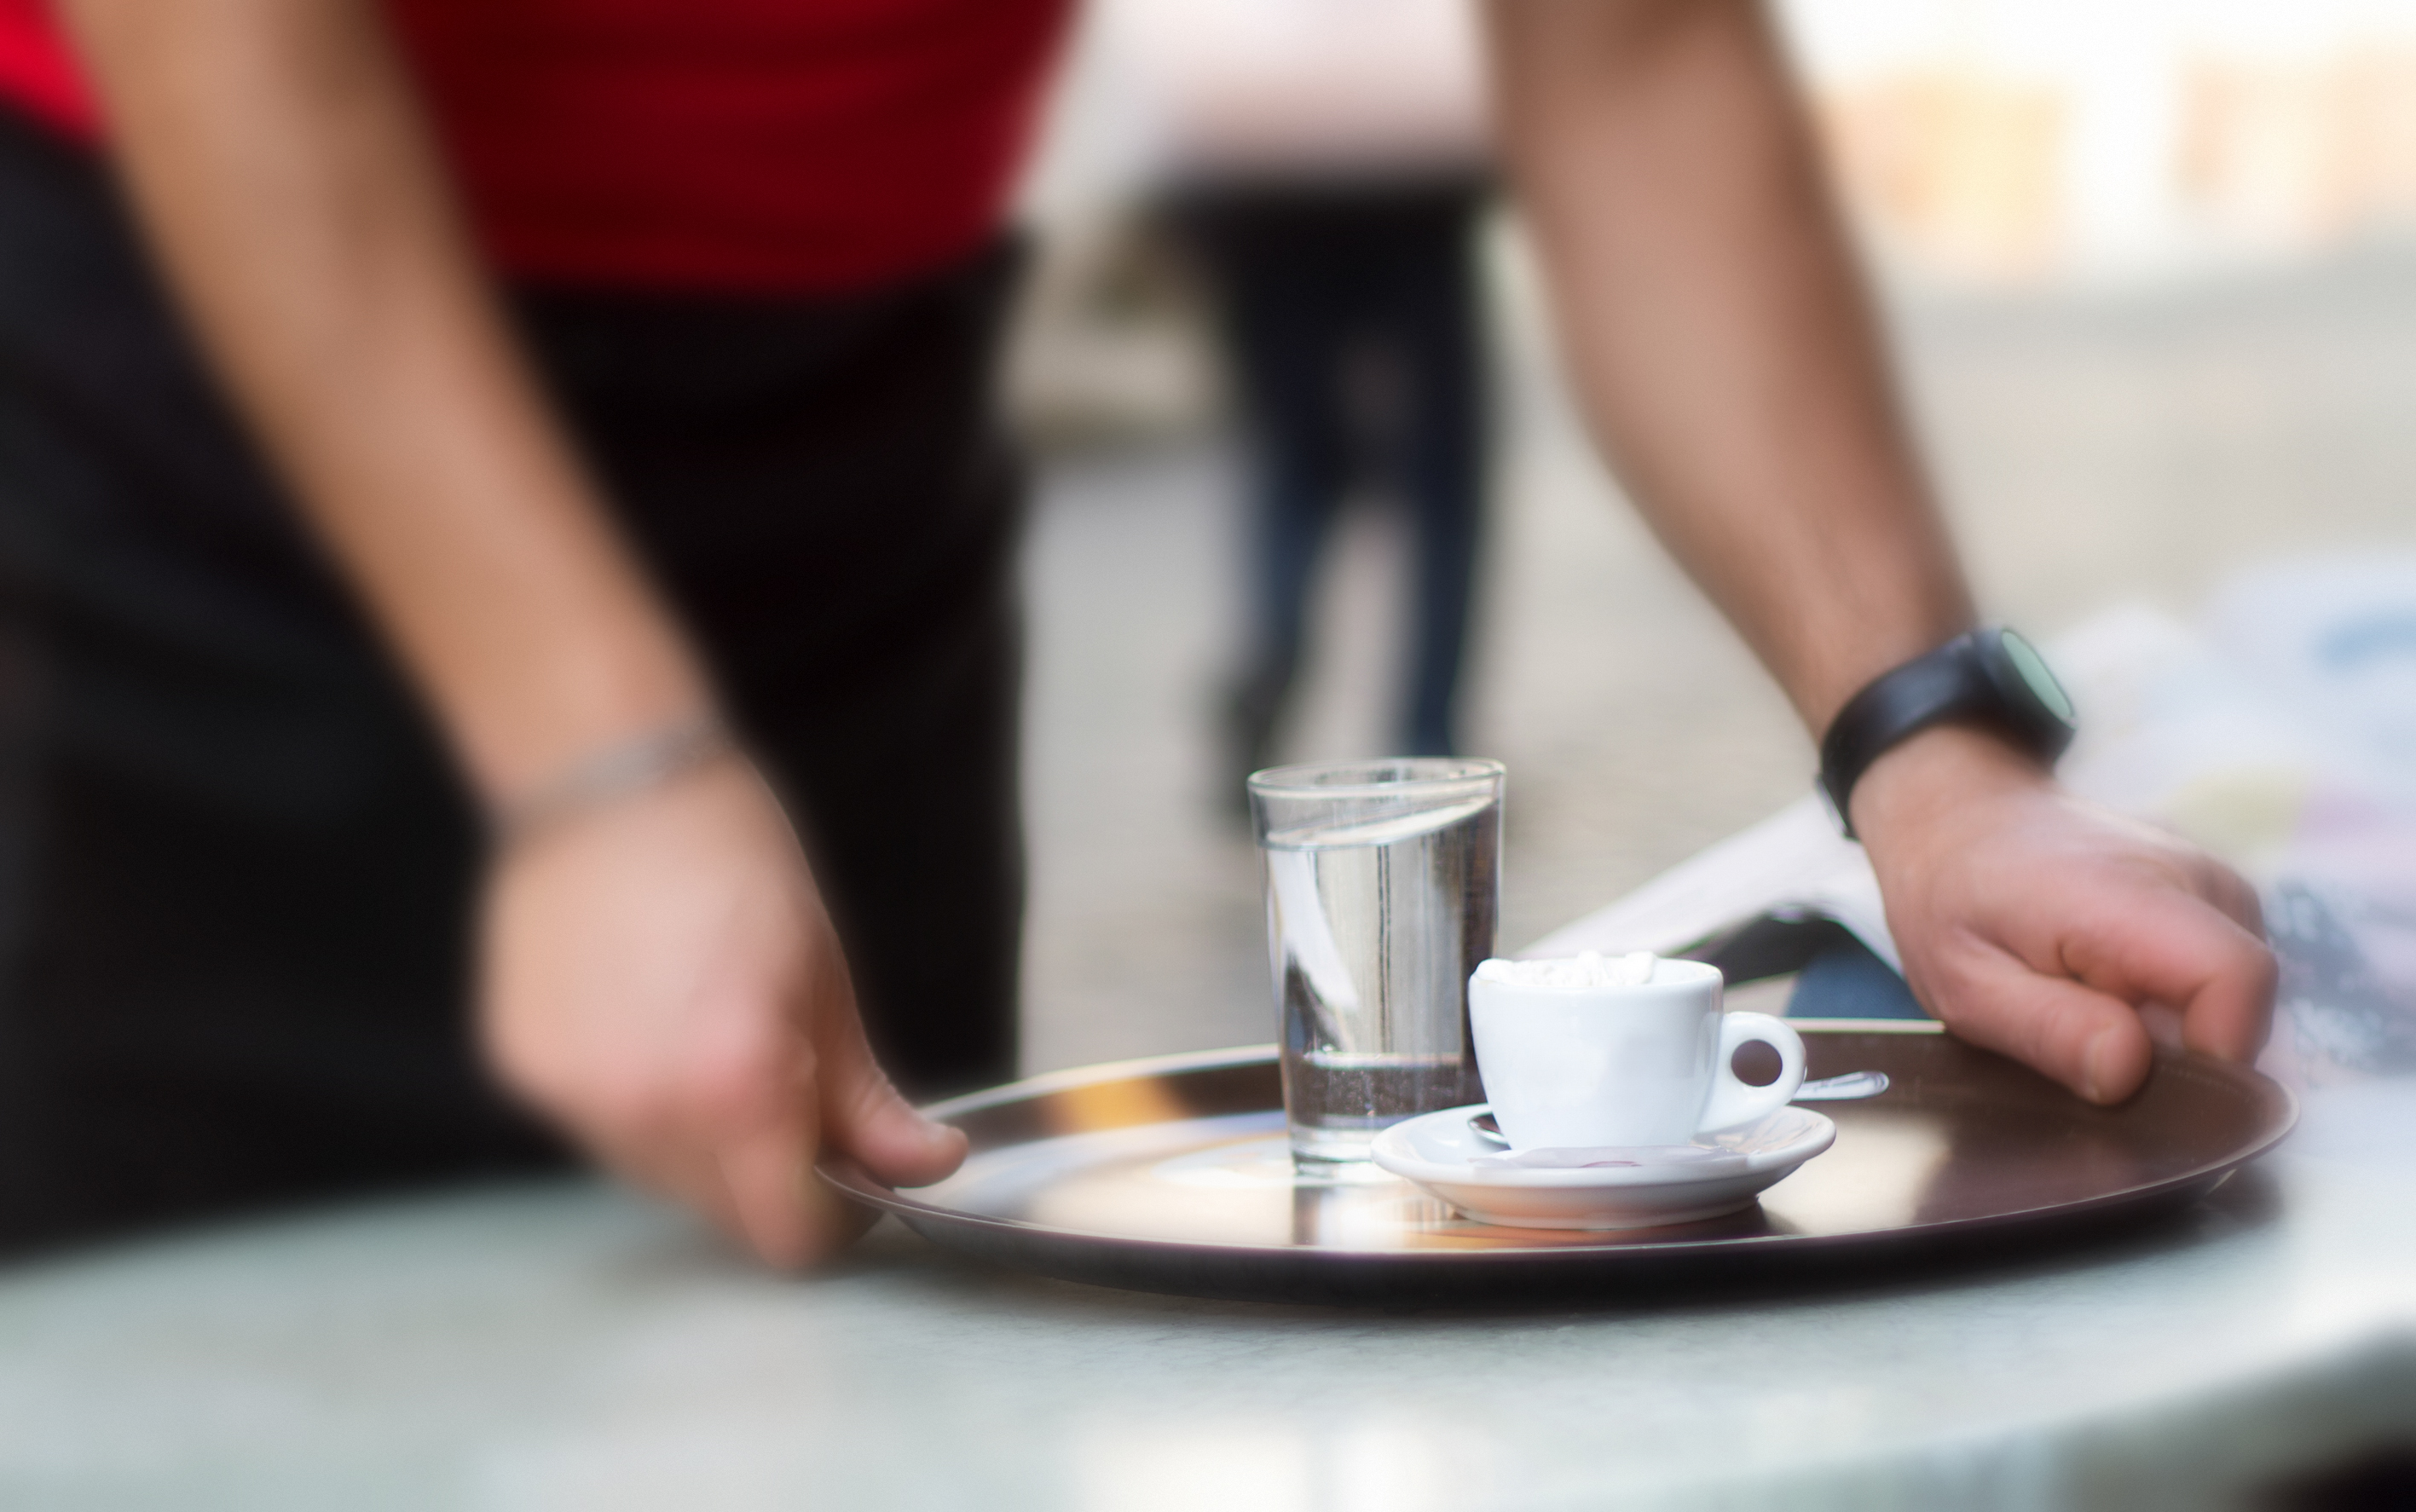 Italy: Barista Sets Down Tray with Coffee at Outdoor Cafe